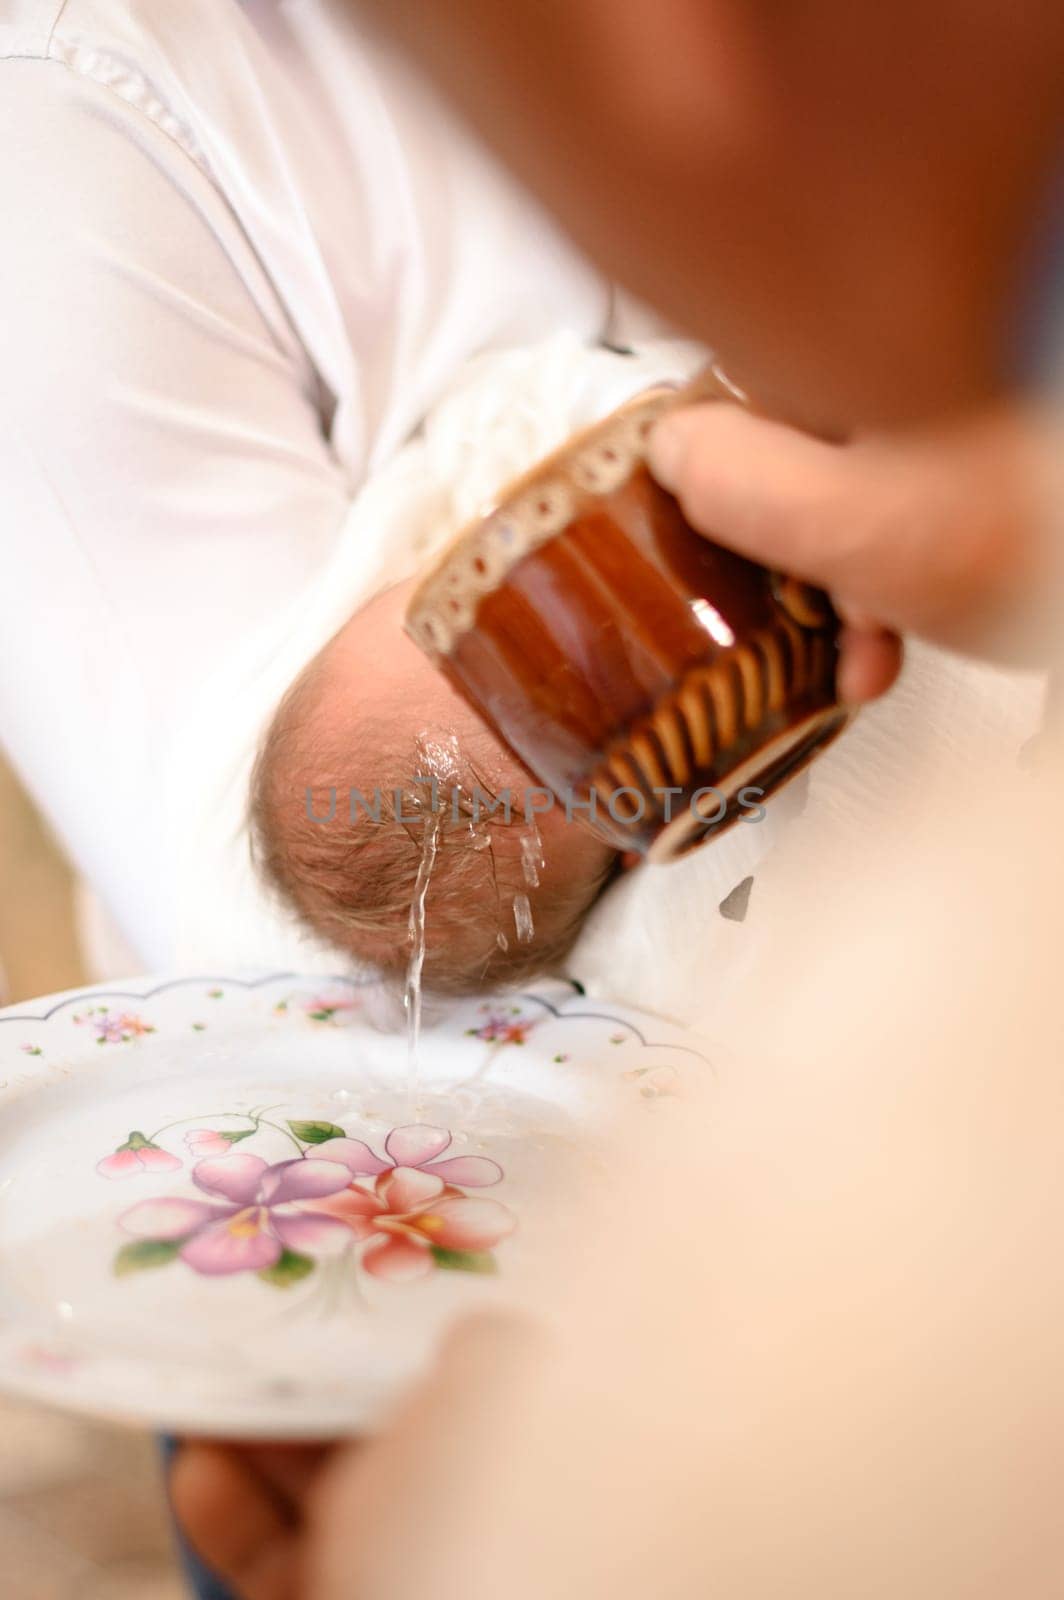 A priest pours water on the head of a small child during a Christian rite of baptism in a church. by Niko_Cingaryuk